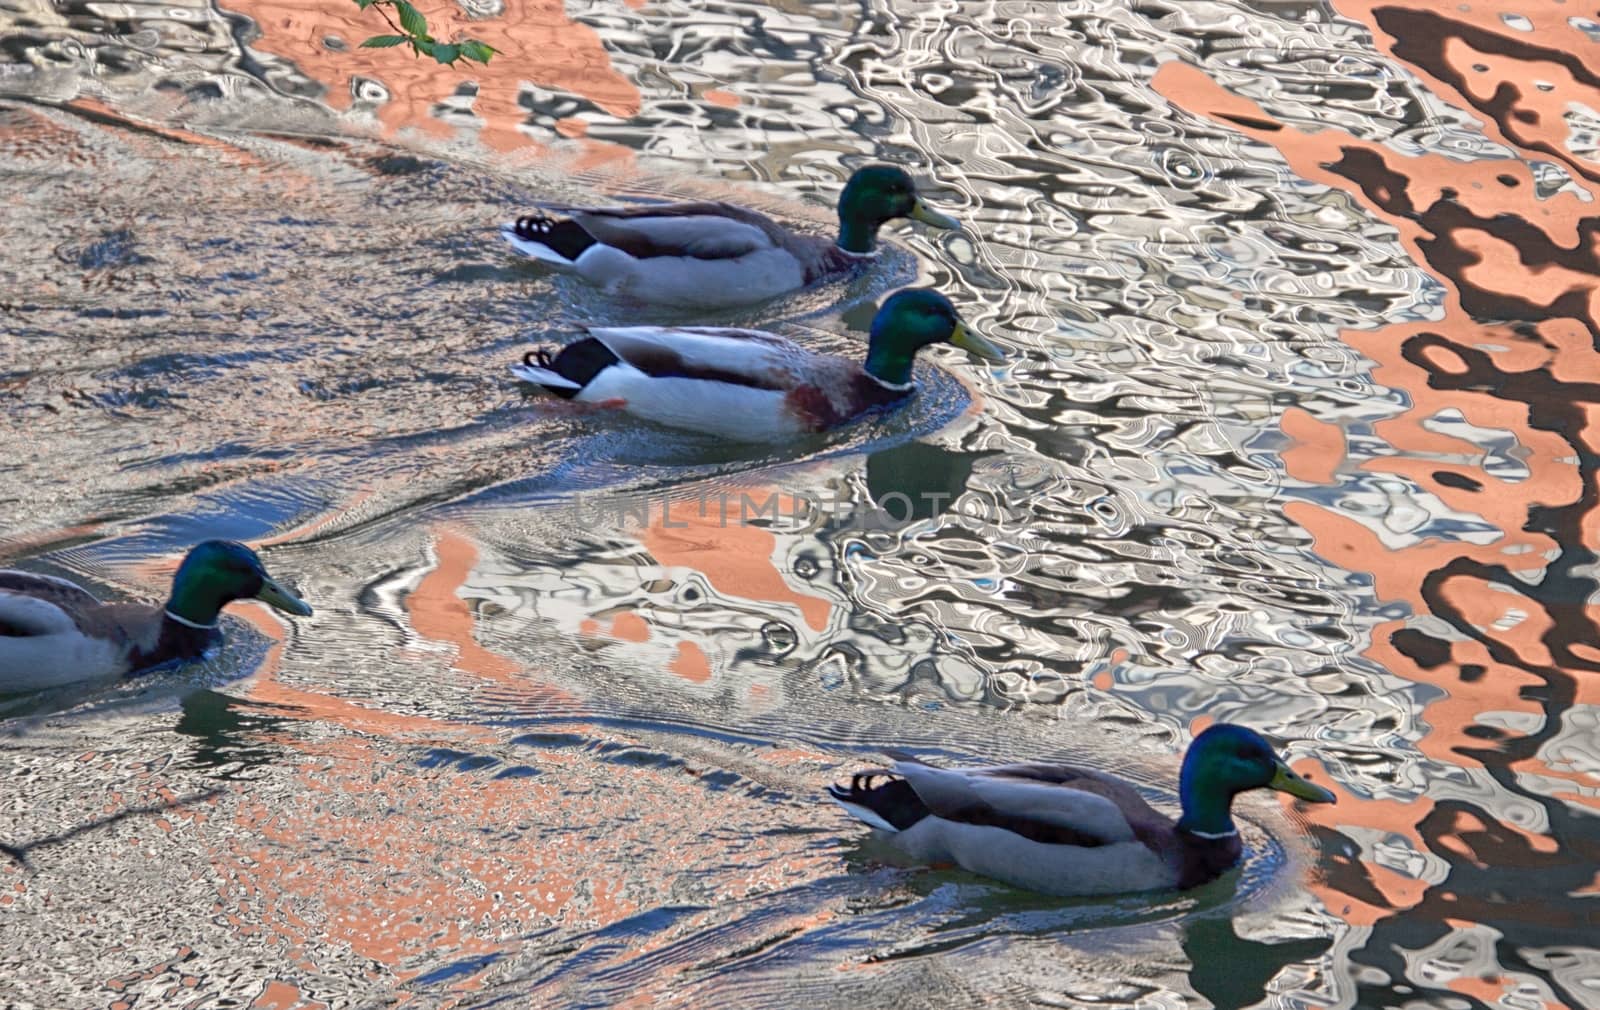 Ducks on a sunny day by MARphoto